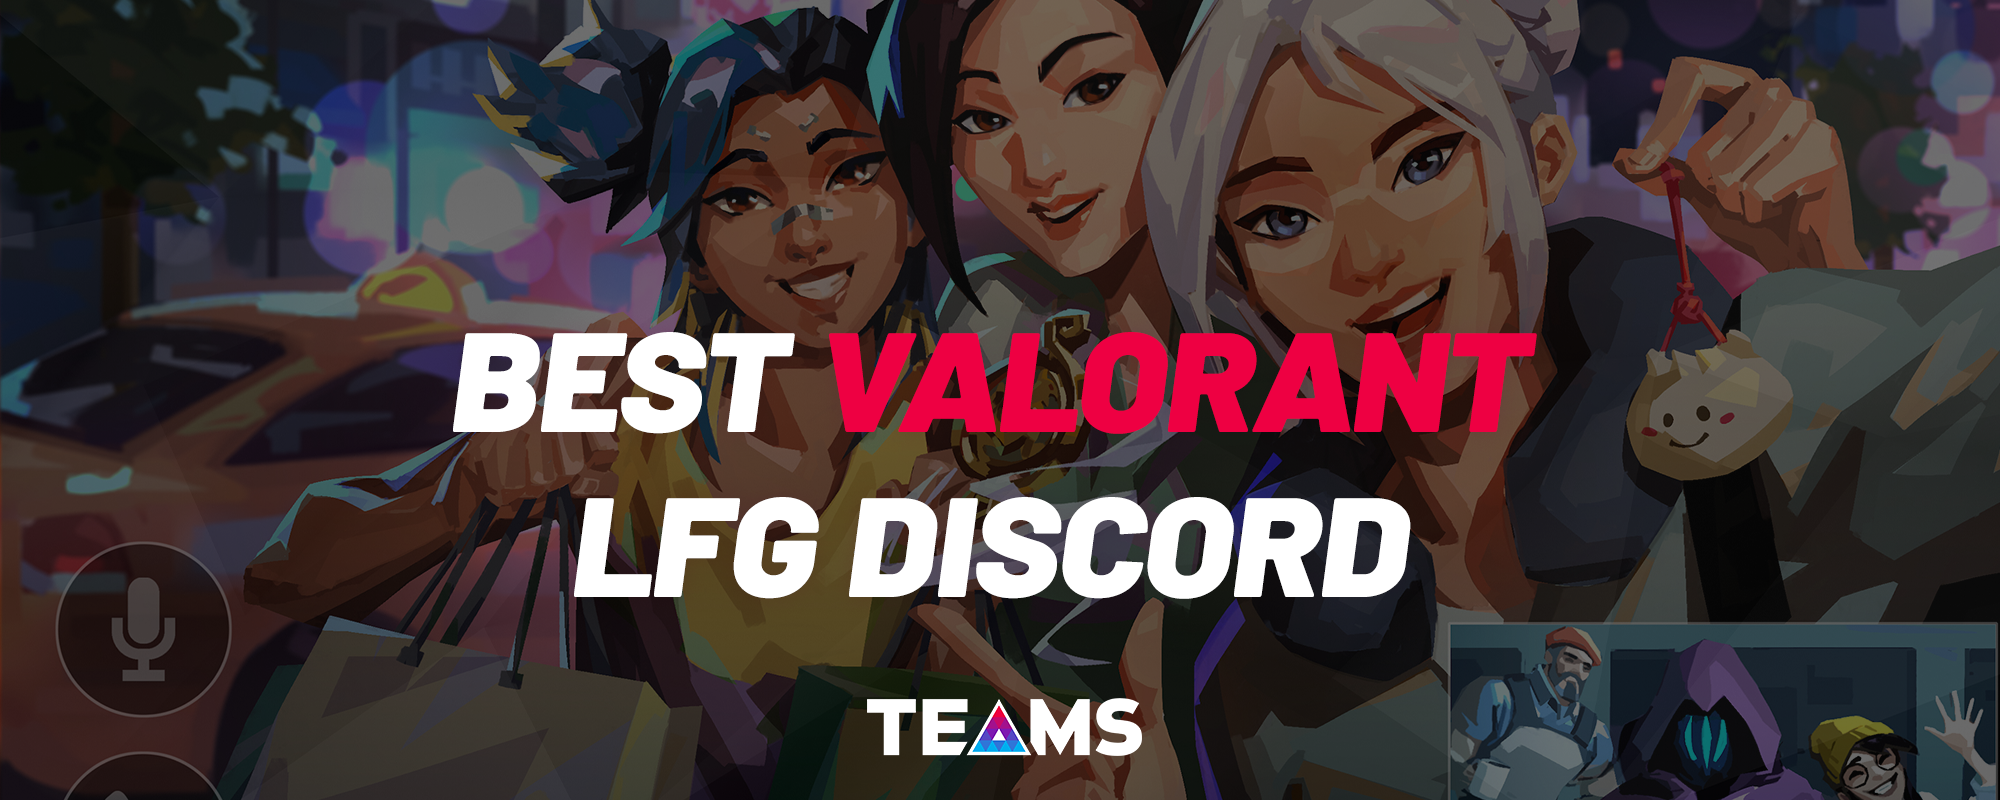 Discord in bio! Come have some fun! #fyp #foryou #valorant